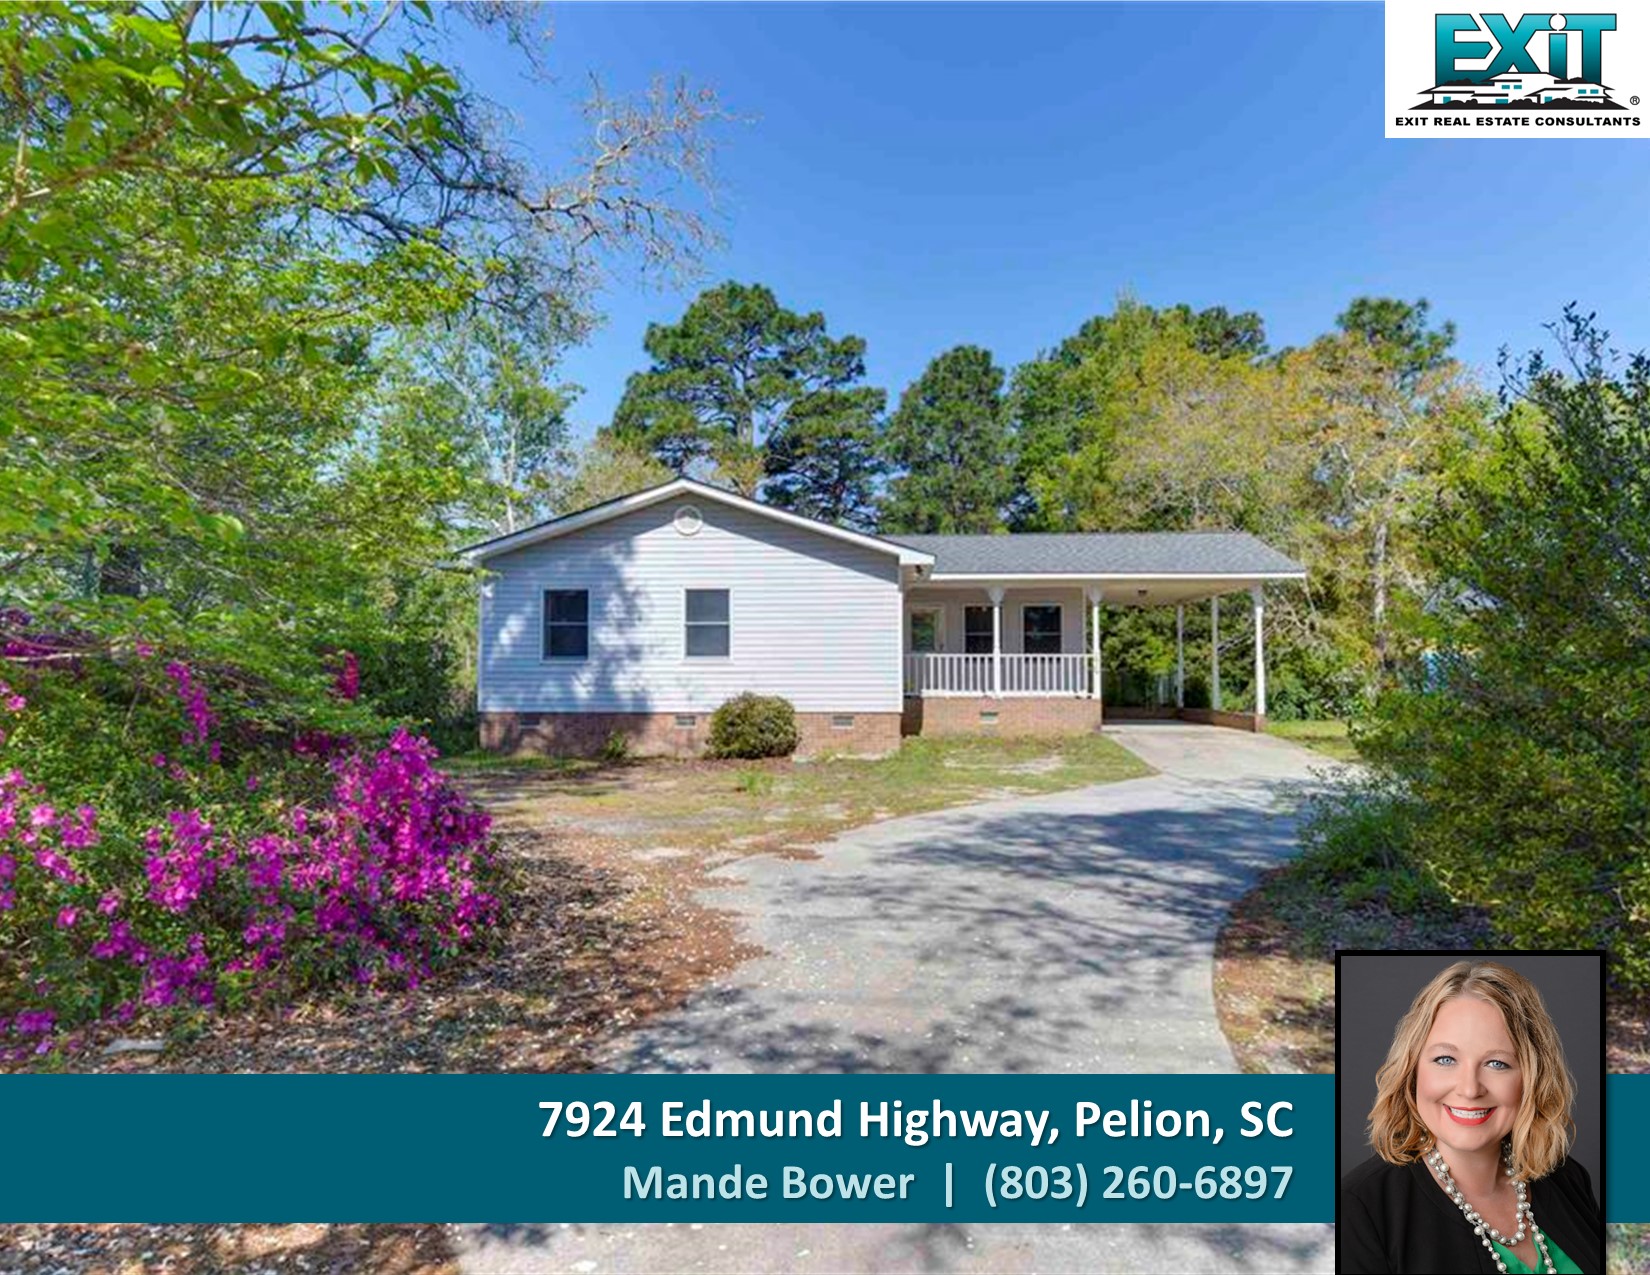 Just listed in Pelion